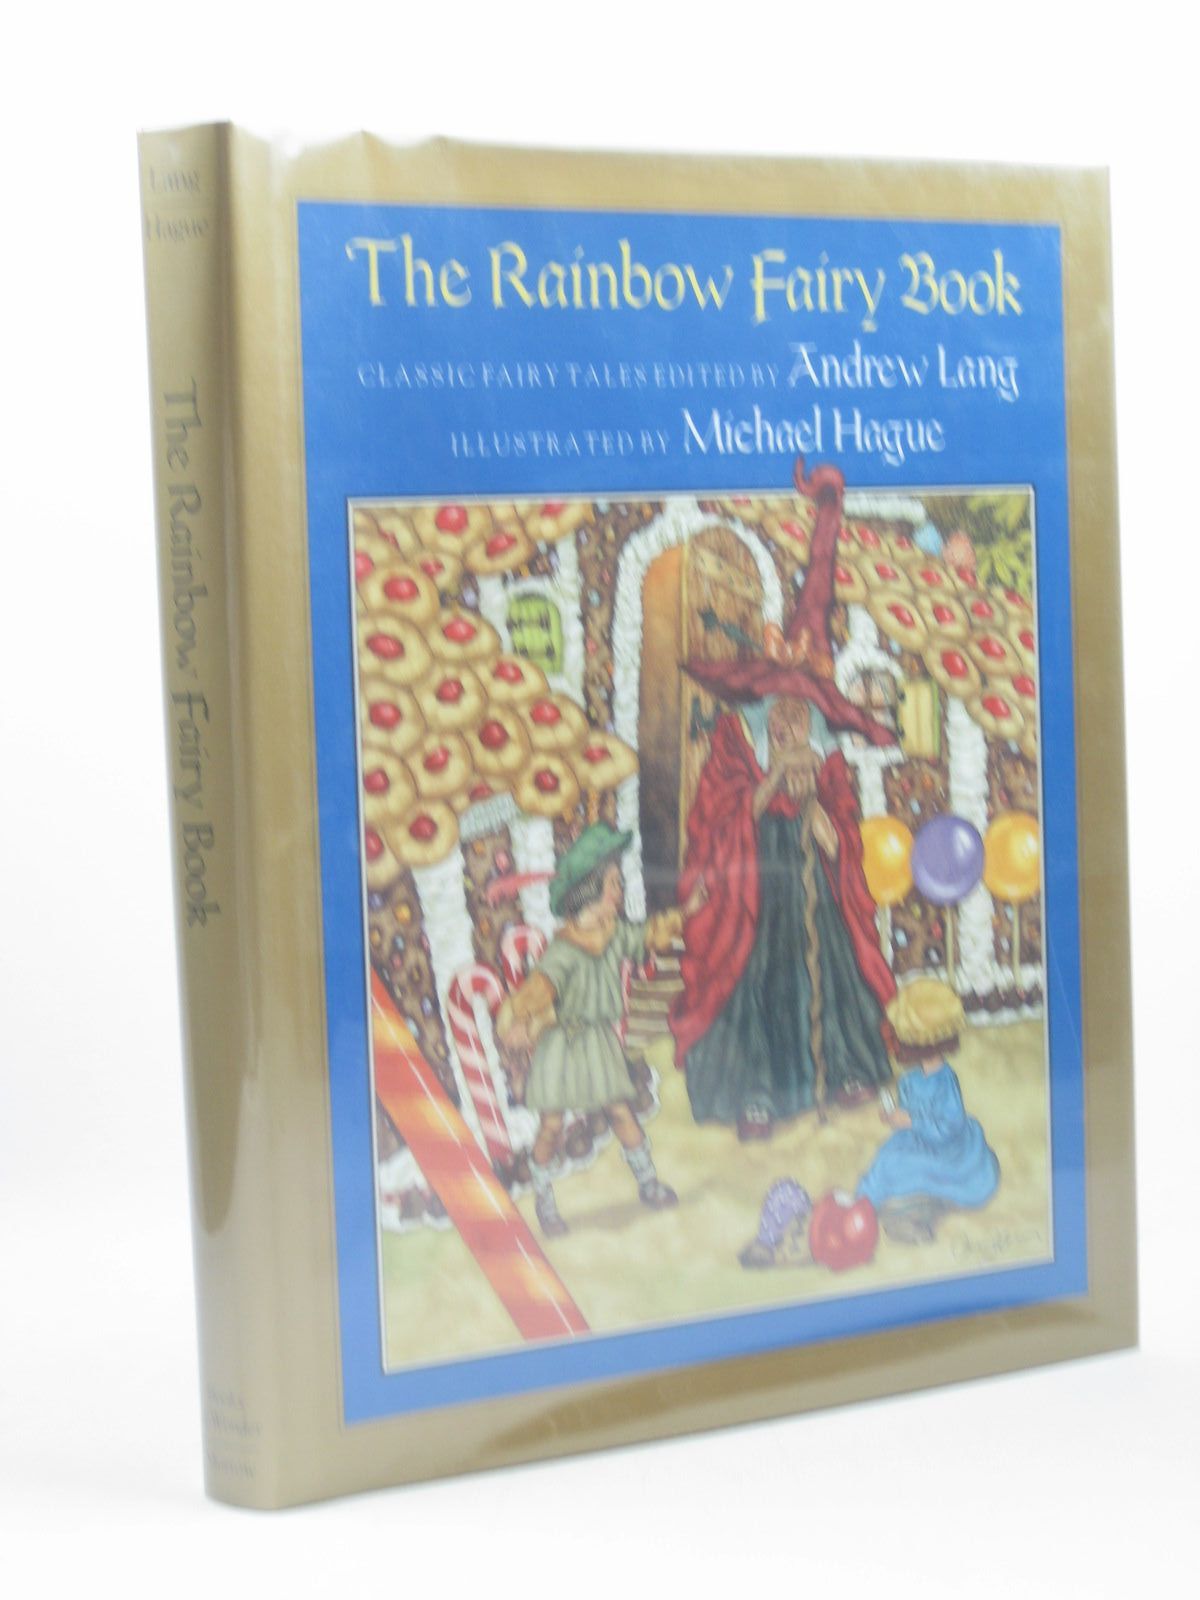 Cover of THE RAINBOW FAIRY BOOK by Andrew Lang